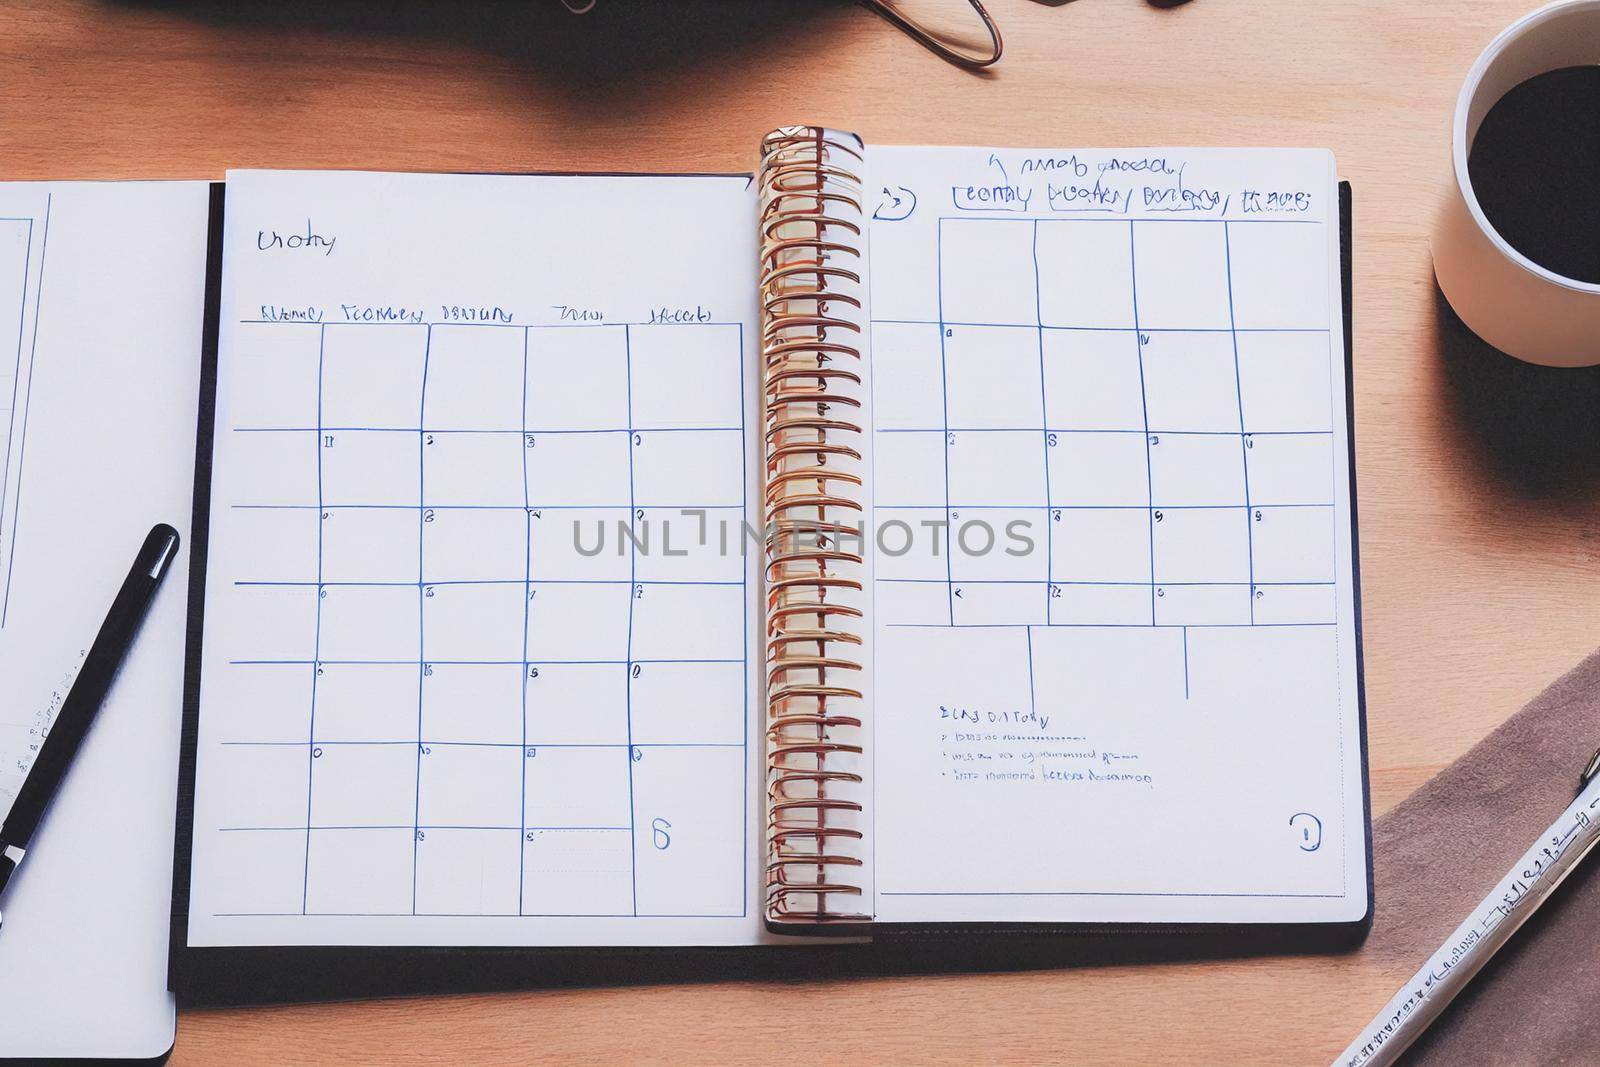 Agenda for the meeting at Calendar book with a blank list, planning conceptually. 3D illustration